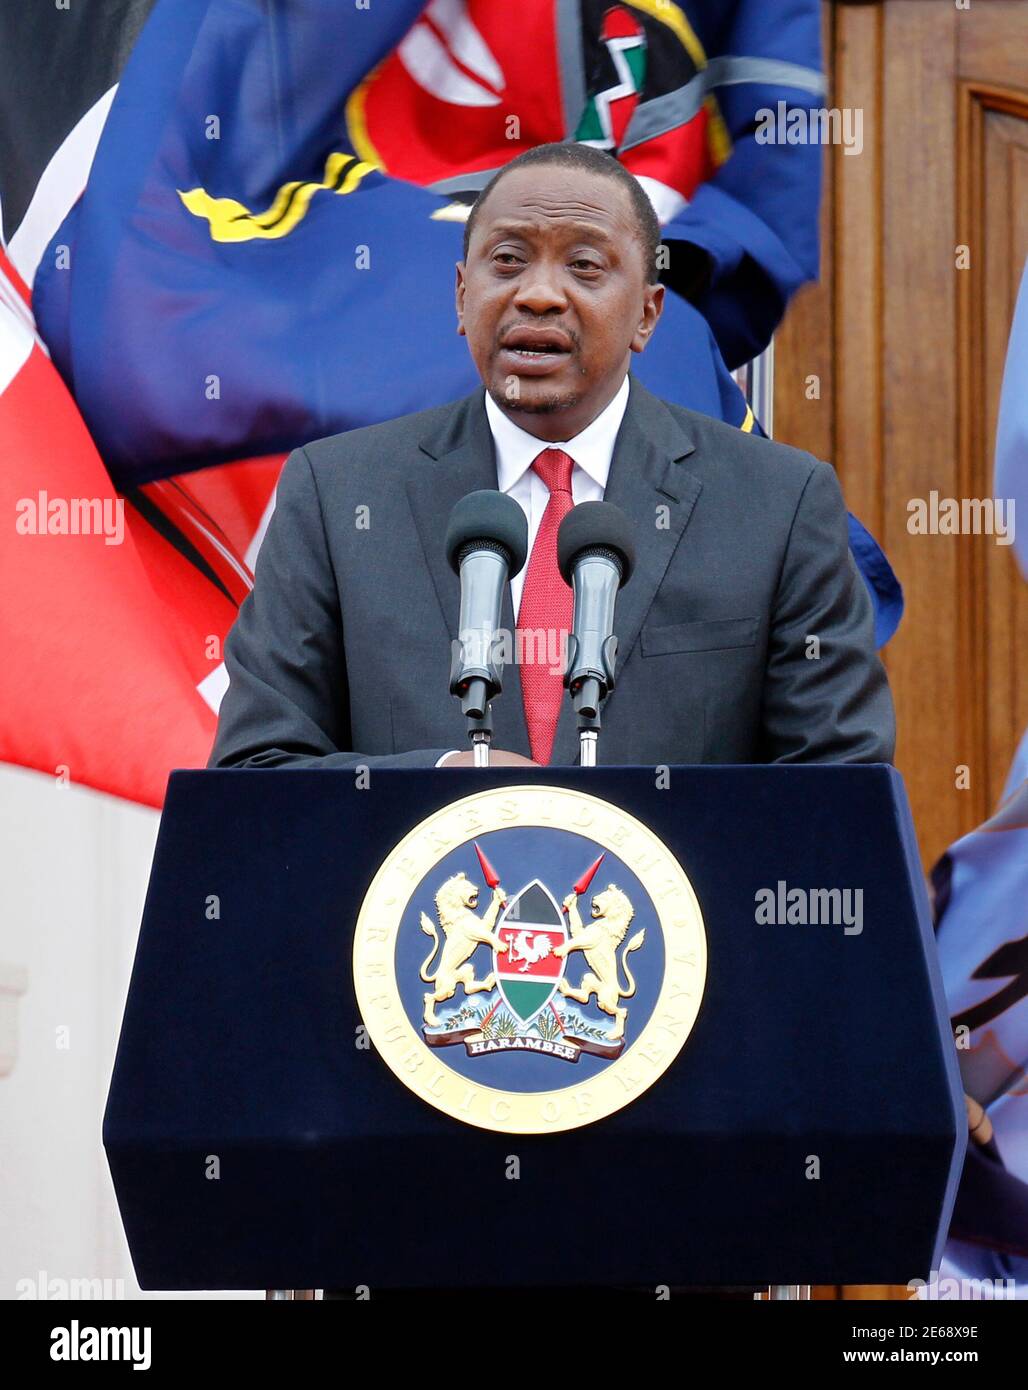 Kenyan President Uhuru Kenyatta addresses a news conference at the State House in Nairobi December 2, 2014. Kenyatta said on Tuesday he had nominated a new interior minister and accepted the resignation of the head of the police, both of whom have been criticised for failing to stop a spate of attacks blamed on Islamist militants.   REUTERS/Thomas Mukoya (KENYA - Tags: POLITICS CIVIL UNREST PROFILE) Stock Photo